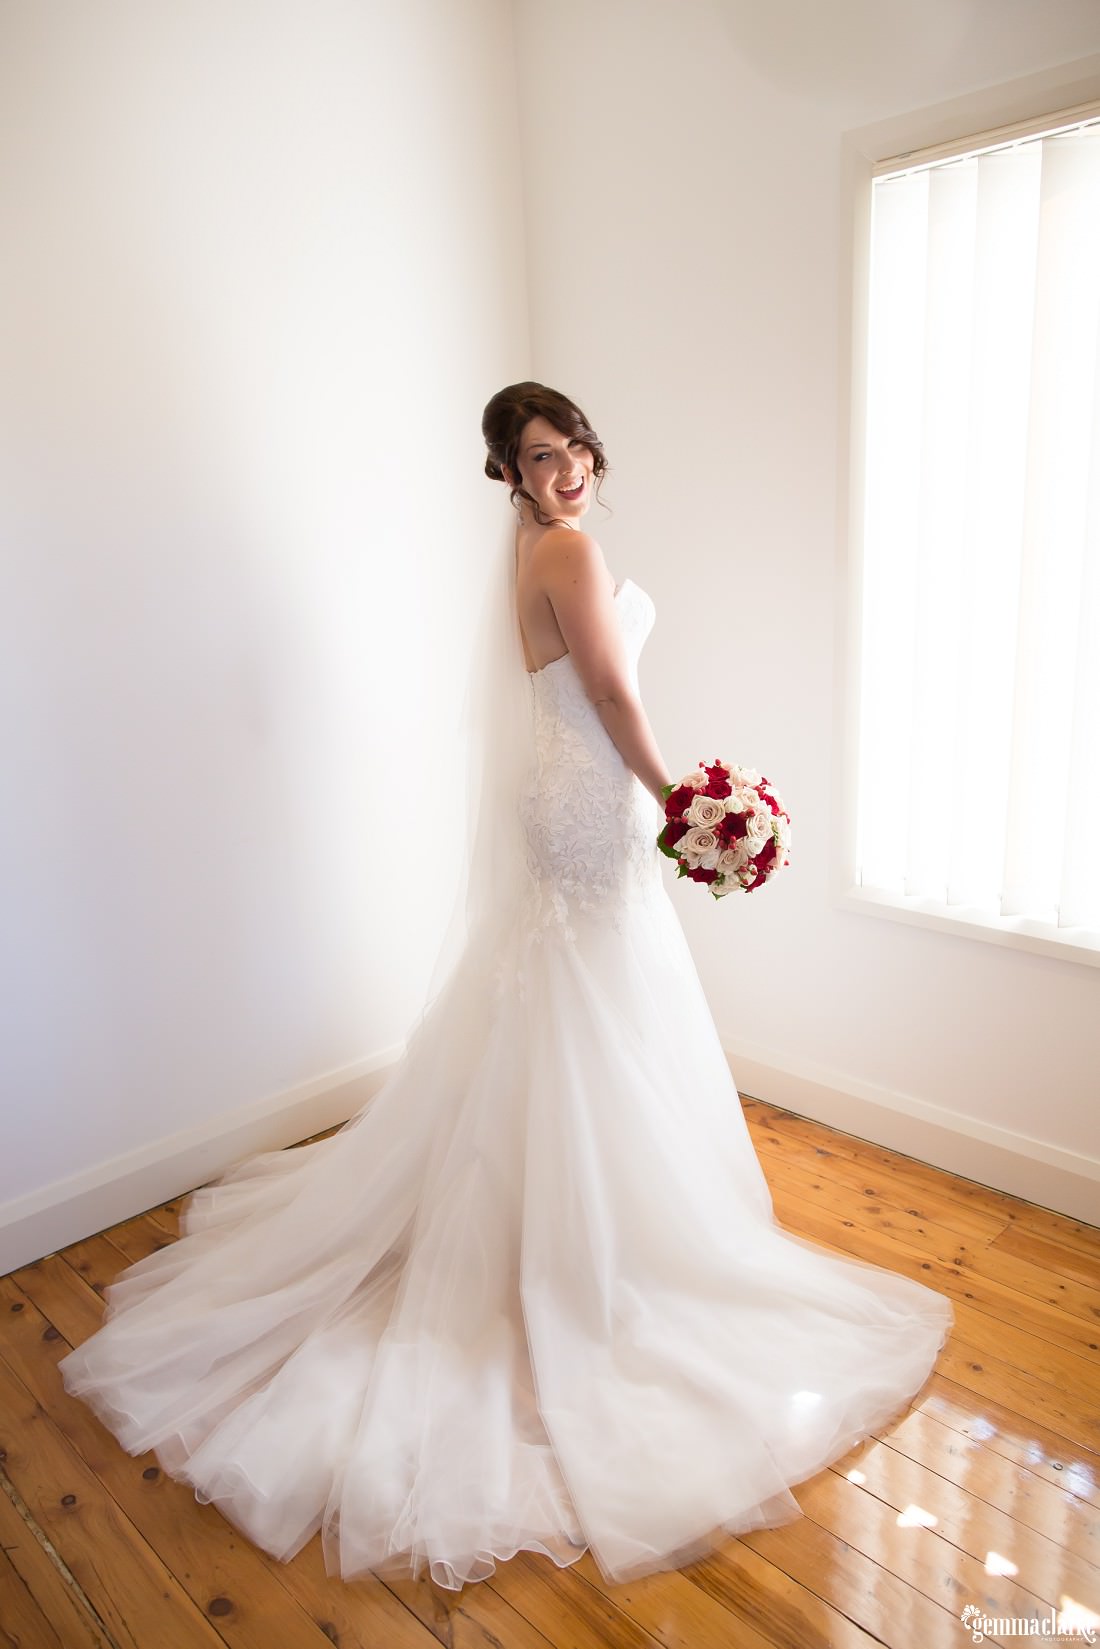 A bride posing and showing off her lovely flowing gown and bouquet - Deckhouse Wedding